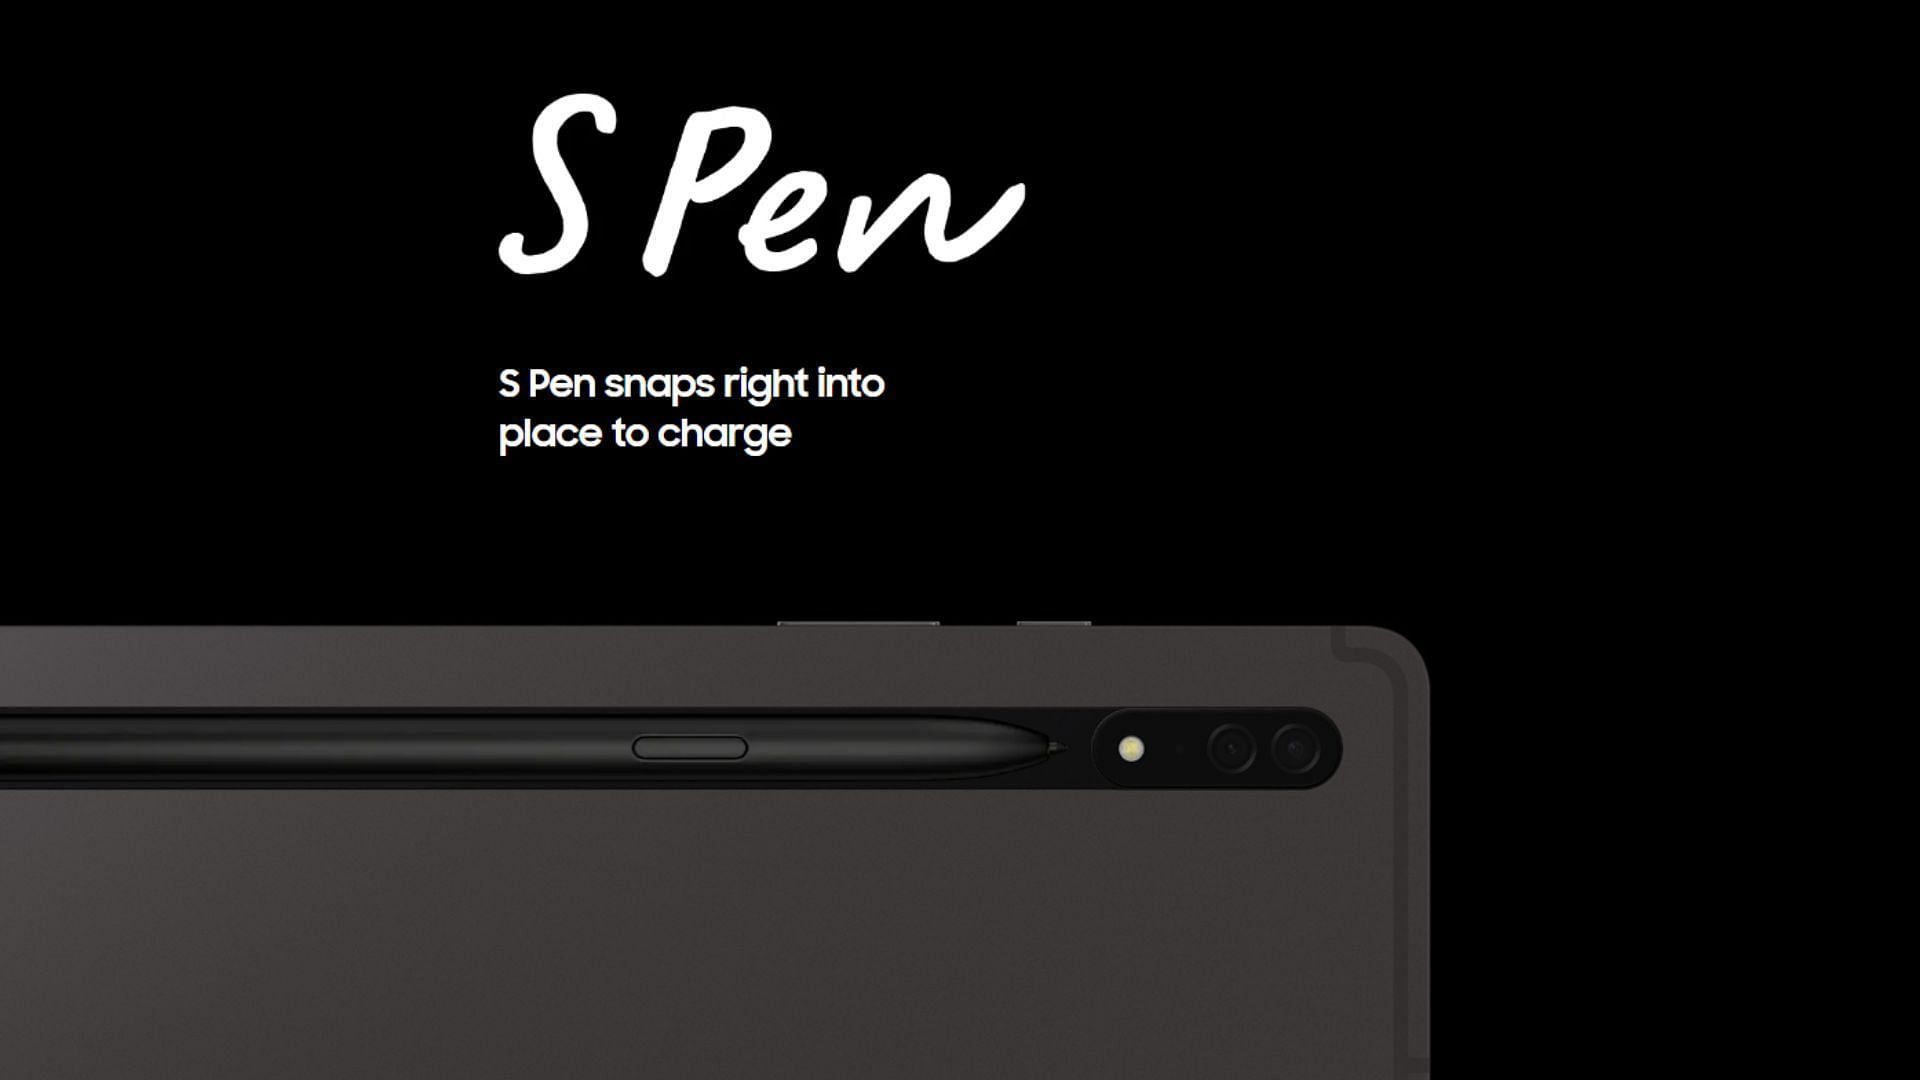 Samsung Galaxy Tab S8 includes S Pen with it (Image via Samsung)